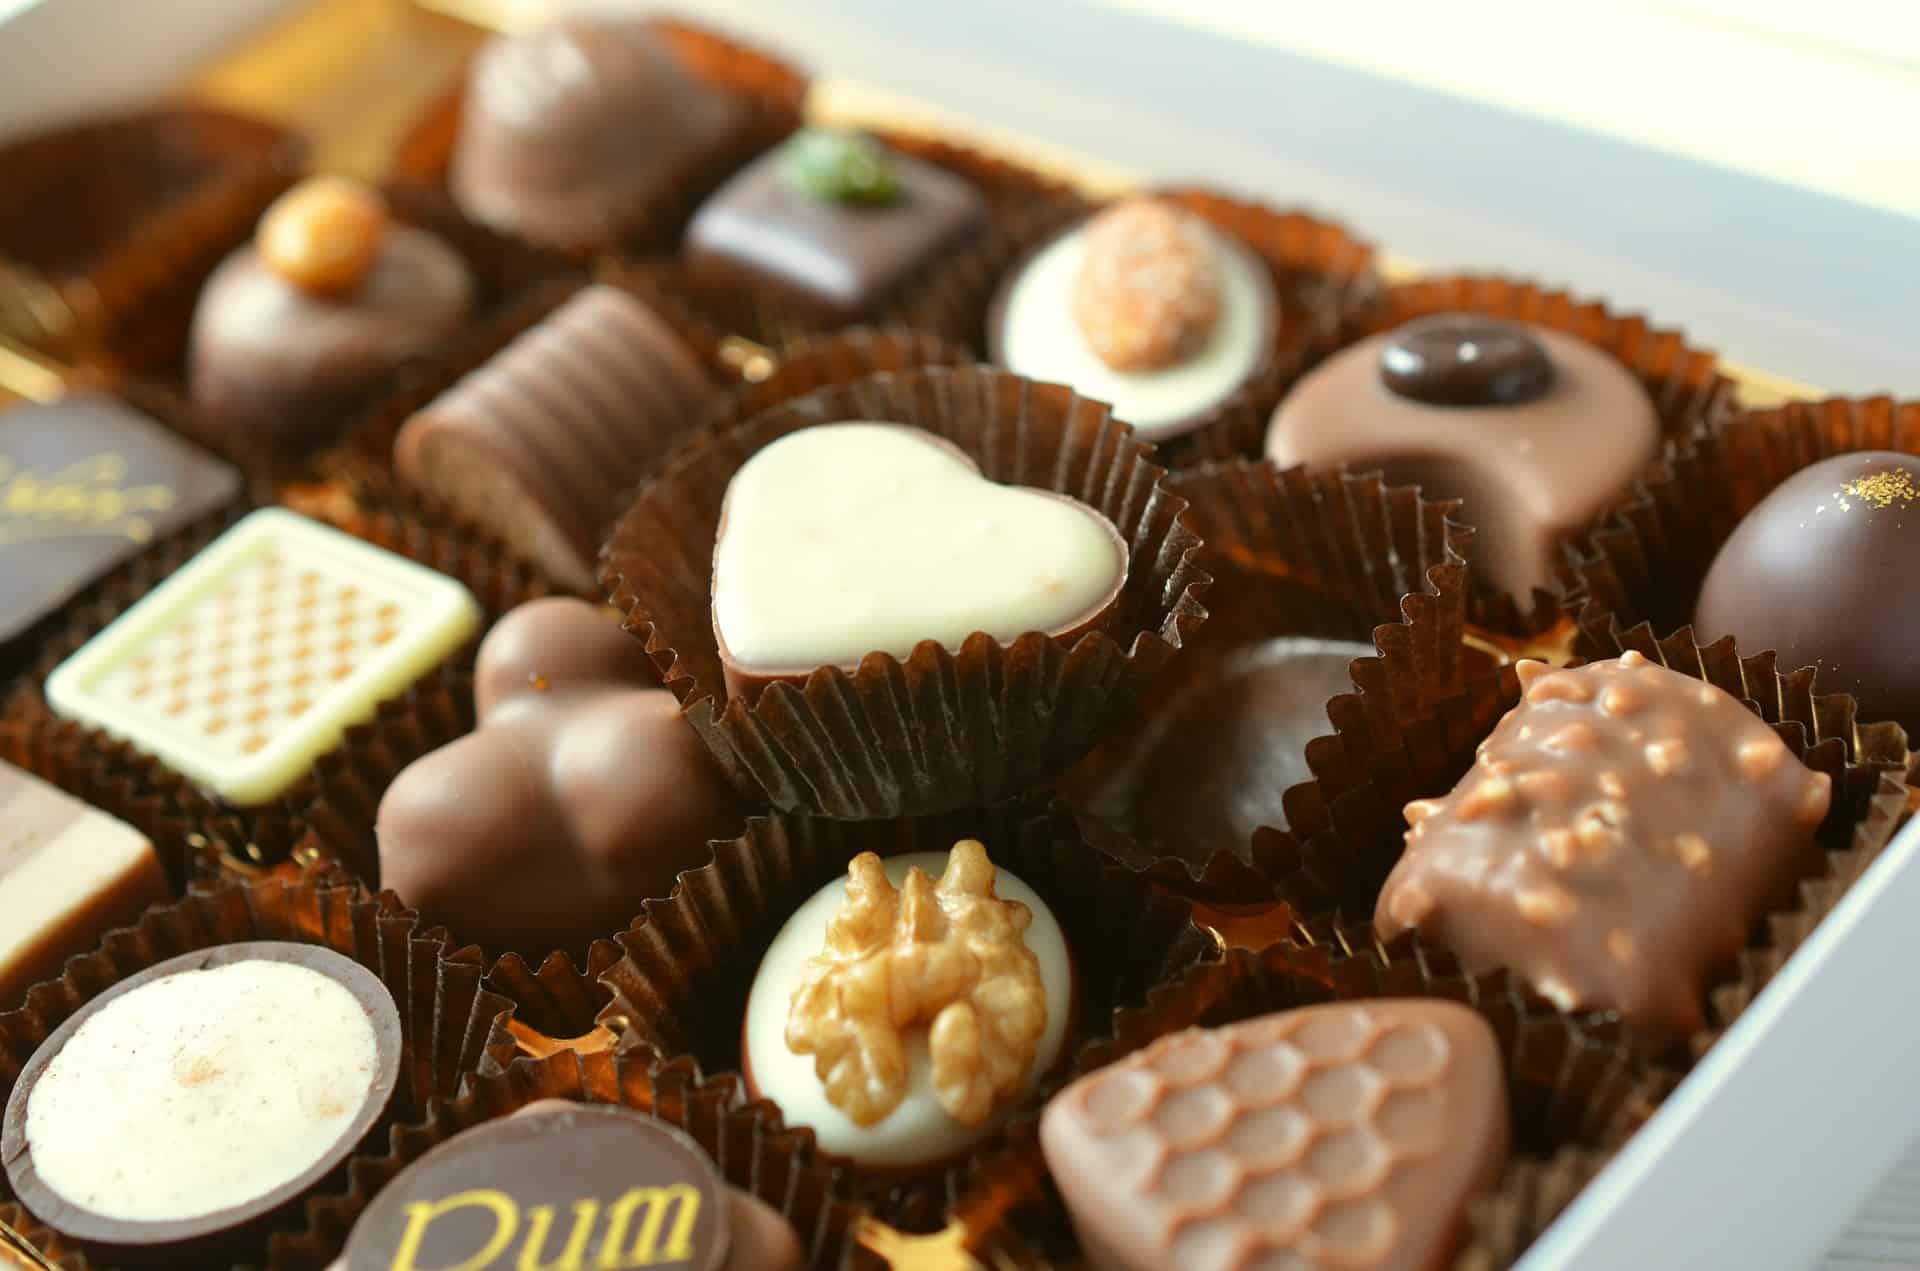 Should we give Valentine's Day Chocolates?